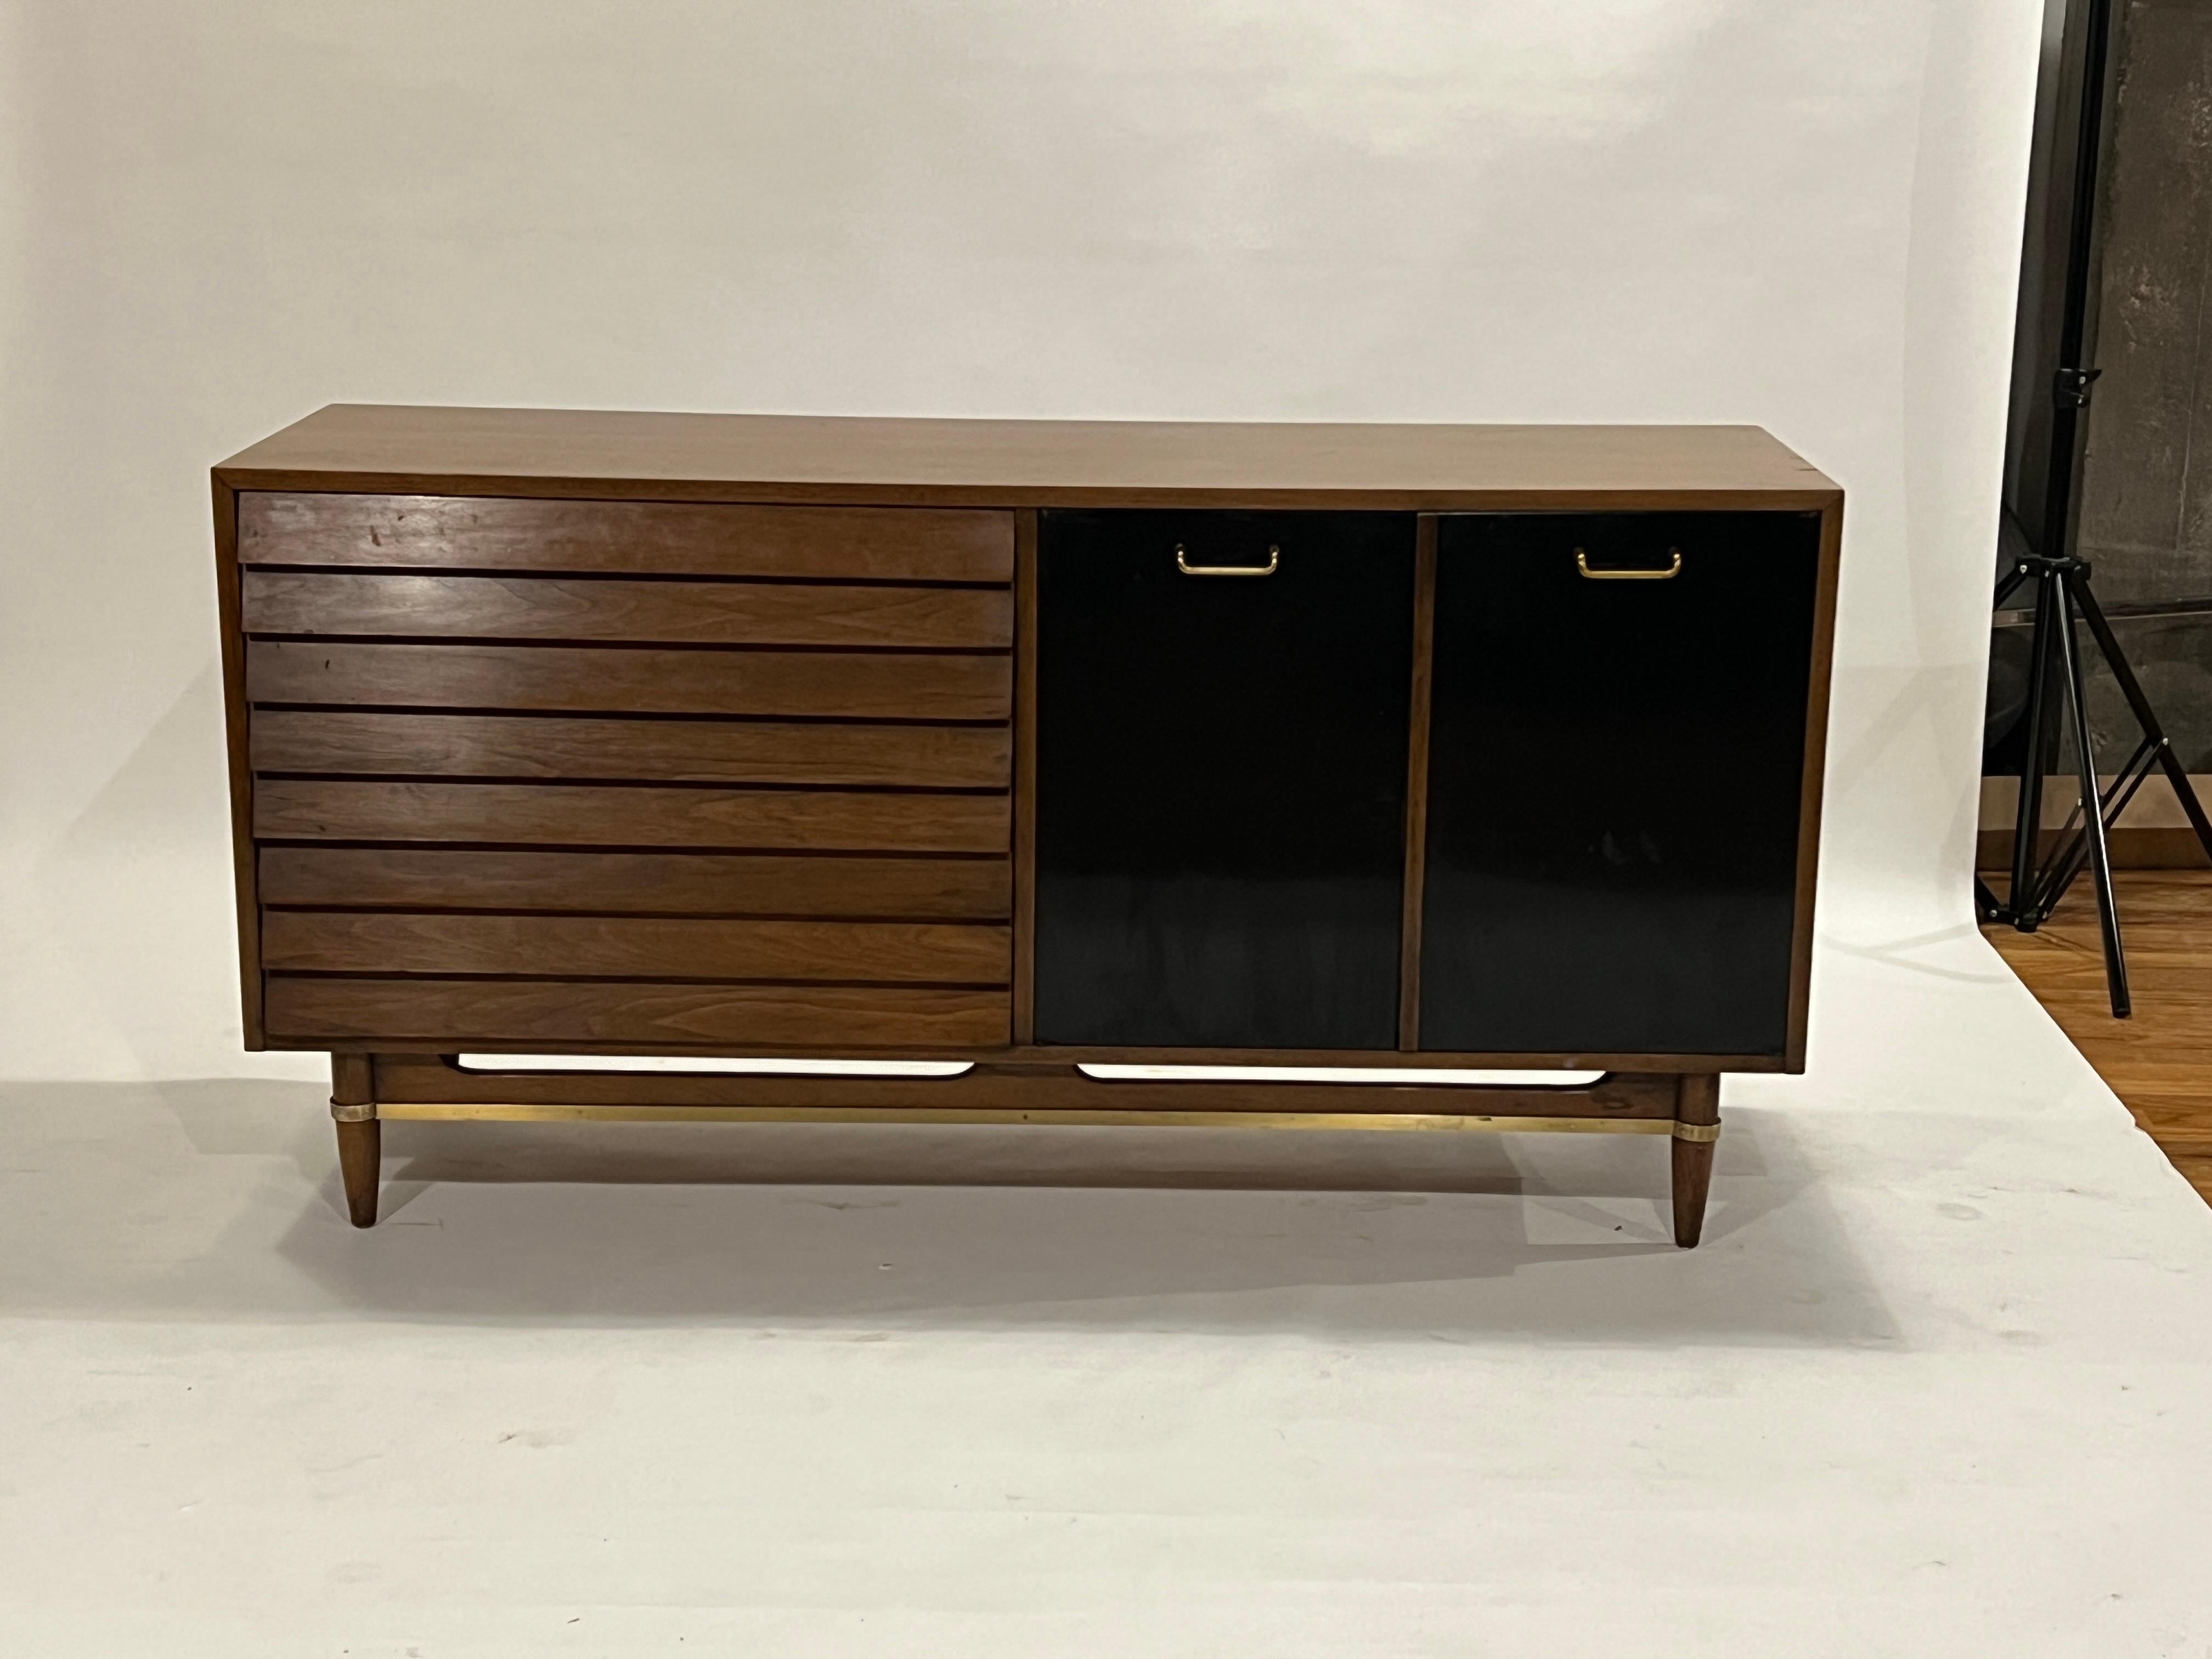 Mid-Century Modern low boy dresser by Merton Gershun for American of Martinsville in walnut with three long pull out drawers and three interior pull out drawers lacquered in off-white. The cabinet drawers are lacquered in black with a black glass